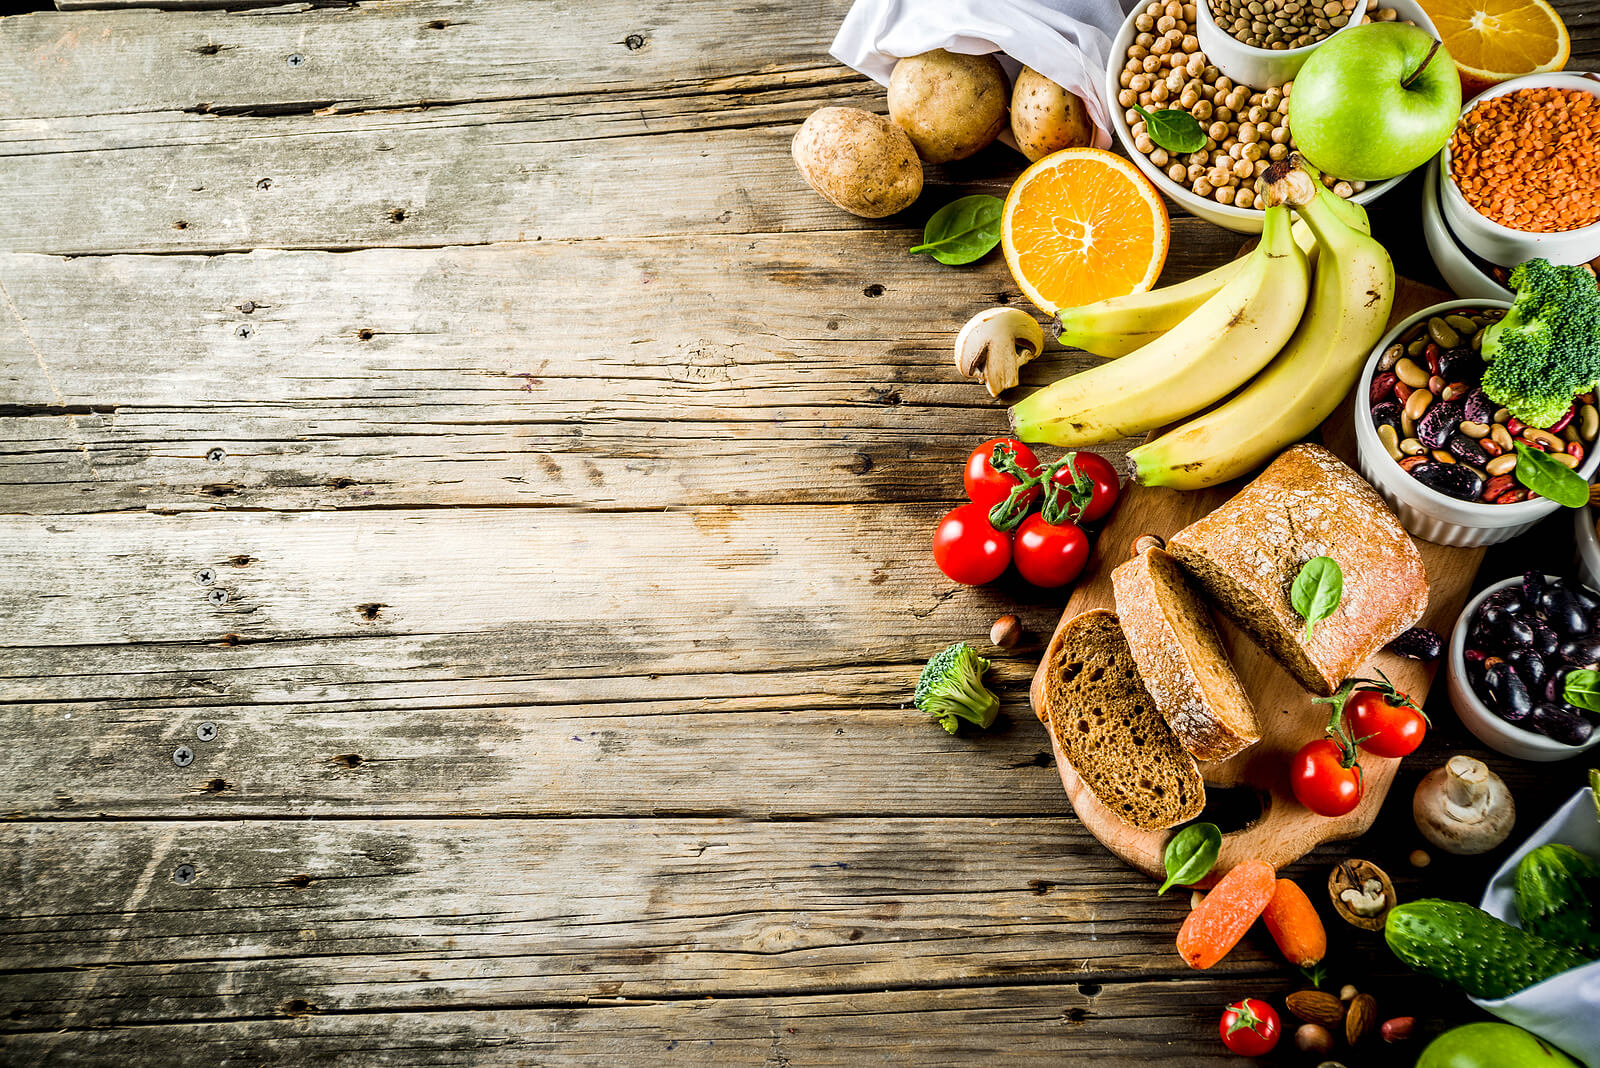 Variety of healthy foods on wooden background.